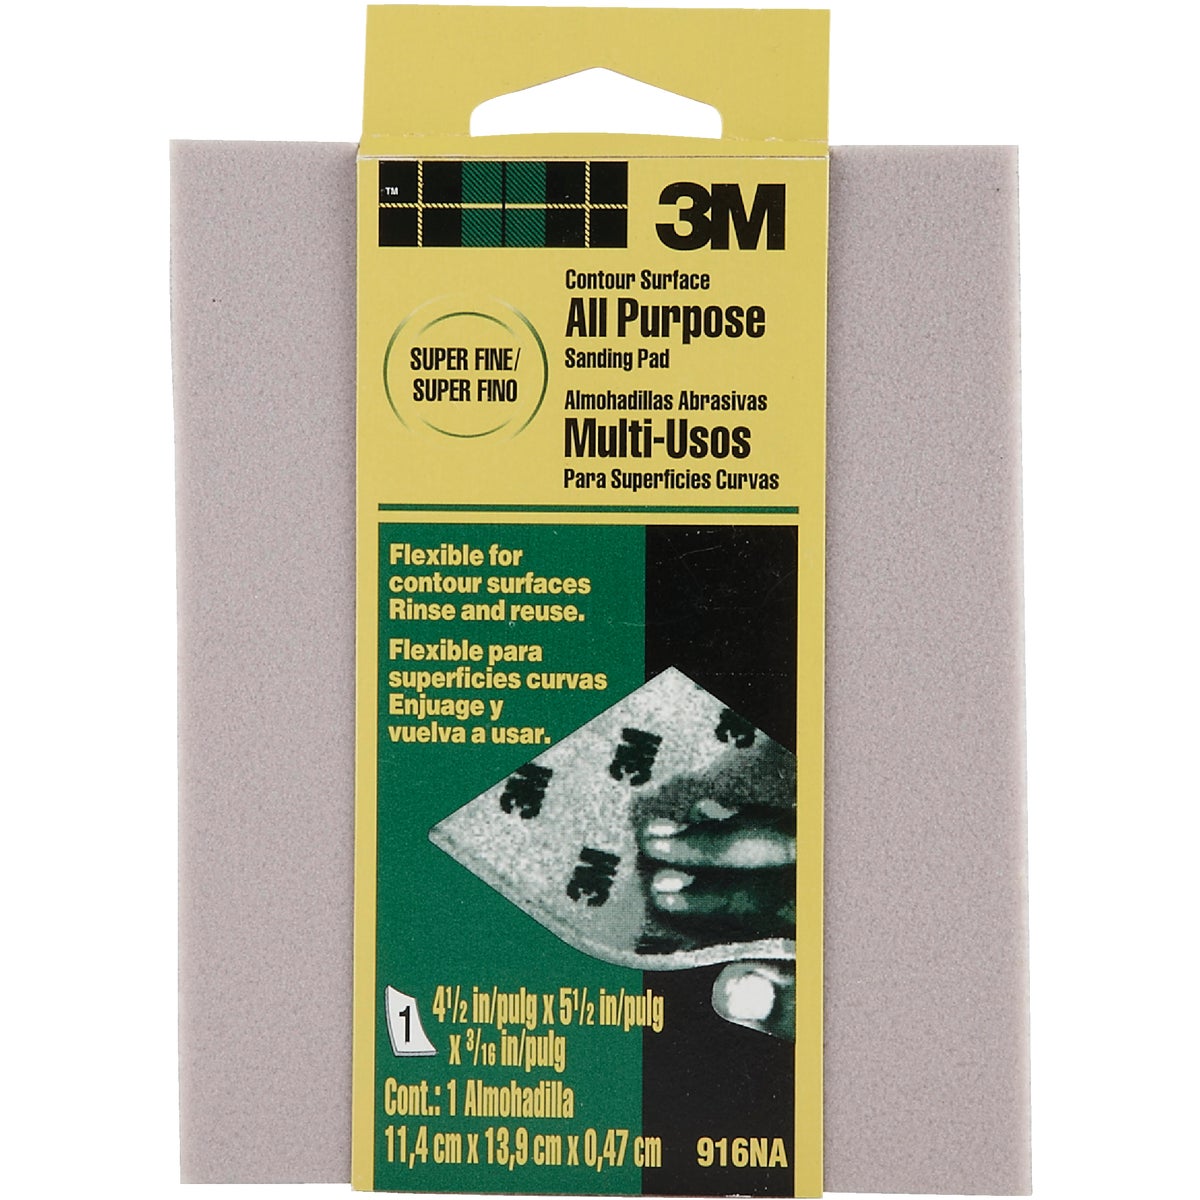 Item 372978, 3M General Purpose Sanding Pads are designed for sanding surfaces such as 